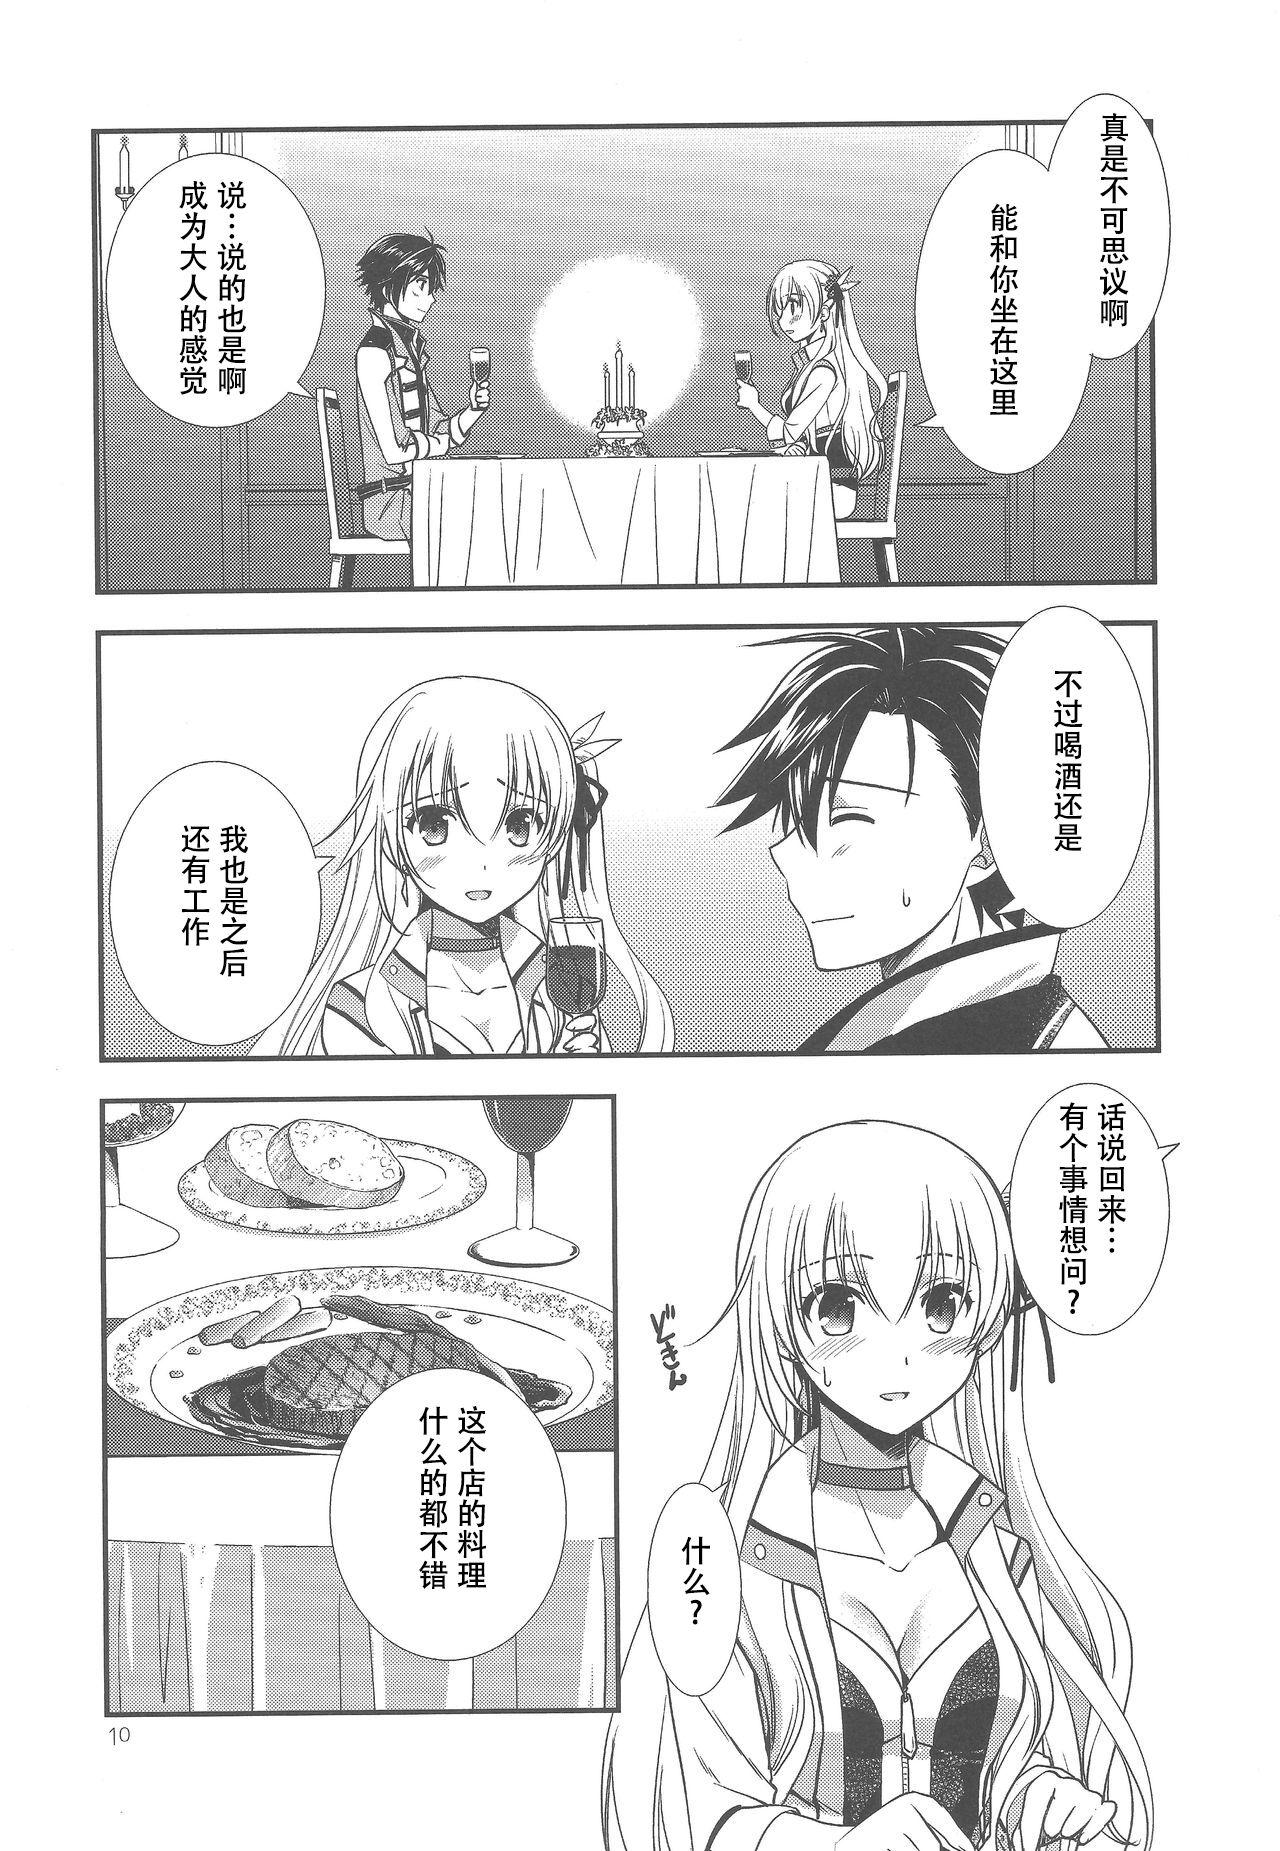 Cheating Wife Houkago Date - The legend of heroes | eiyuu densetsu Blows - Page 8